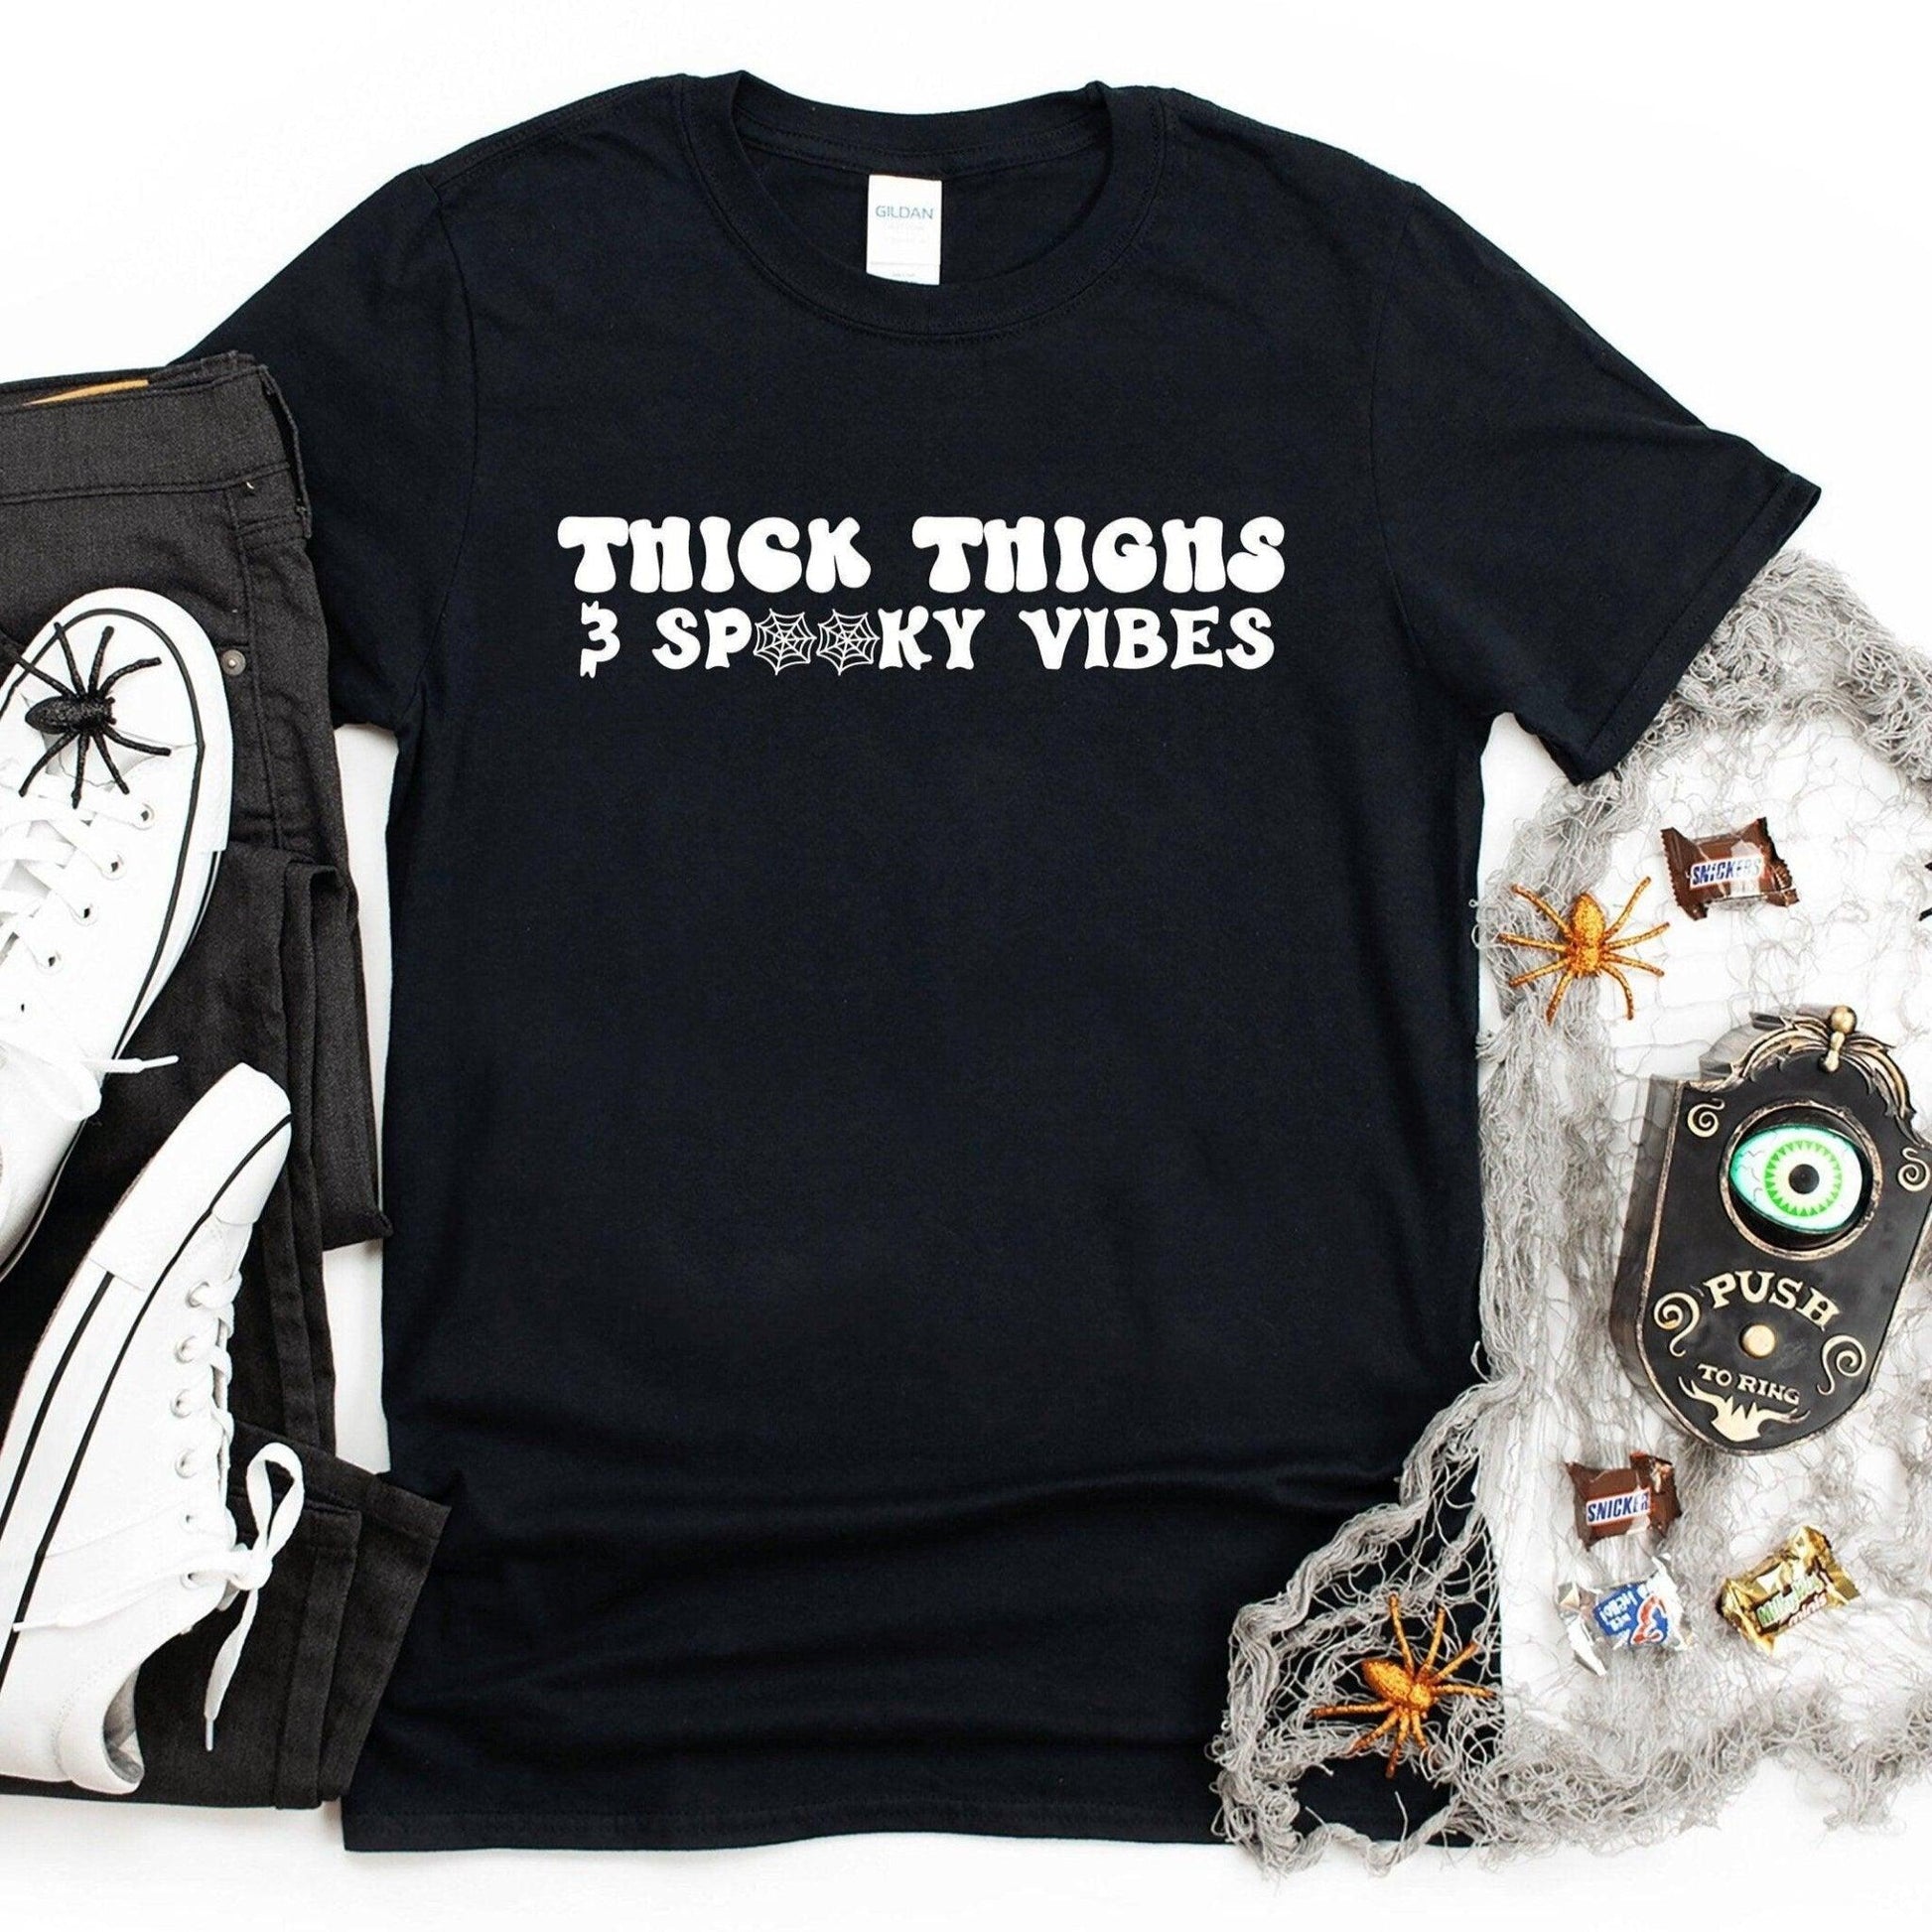 Thick Thighs Spooky Vibes Short Sleeve T-Shirt - Sunshine Soul MD